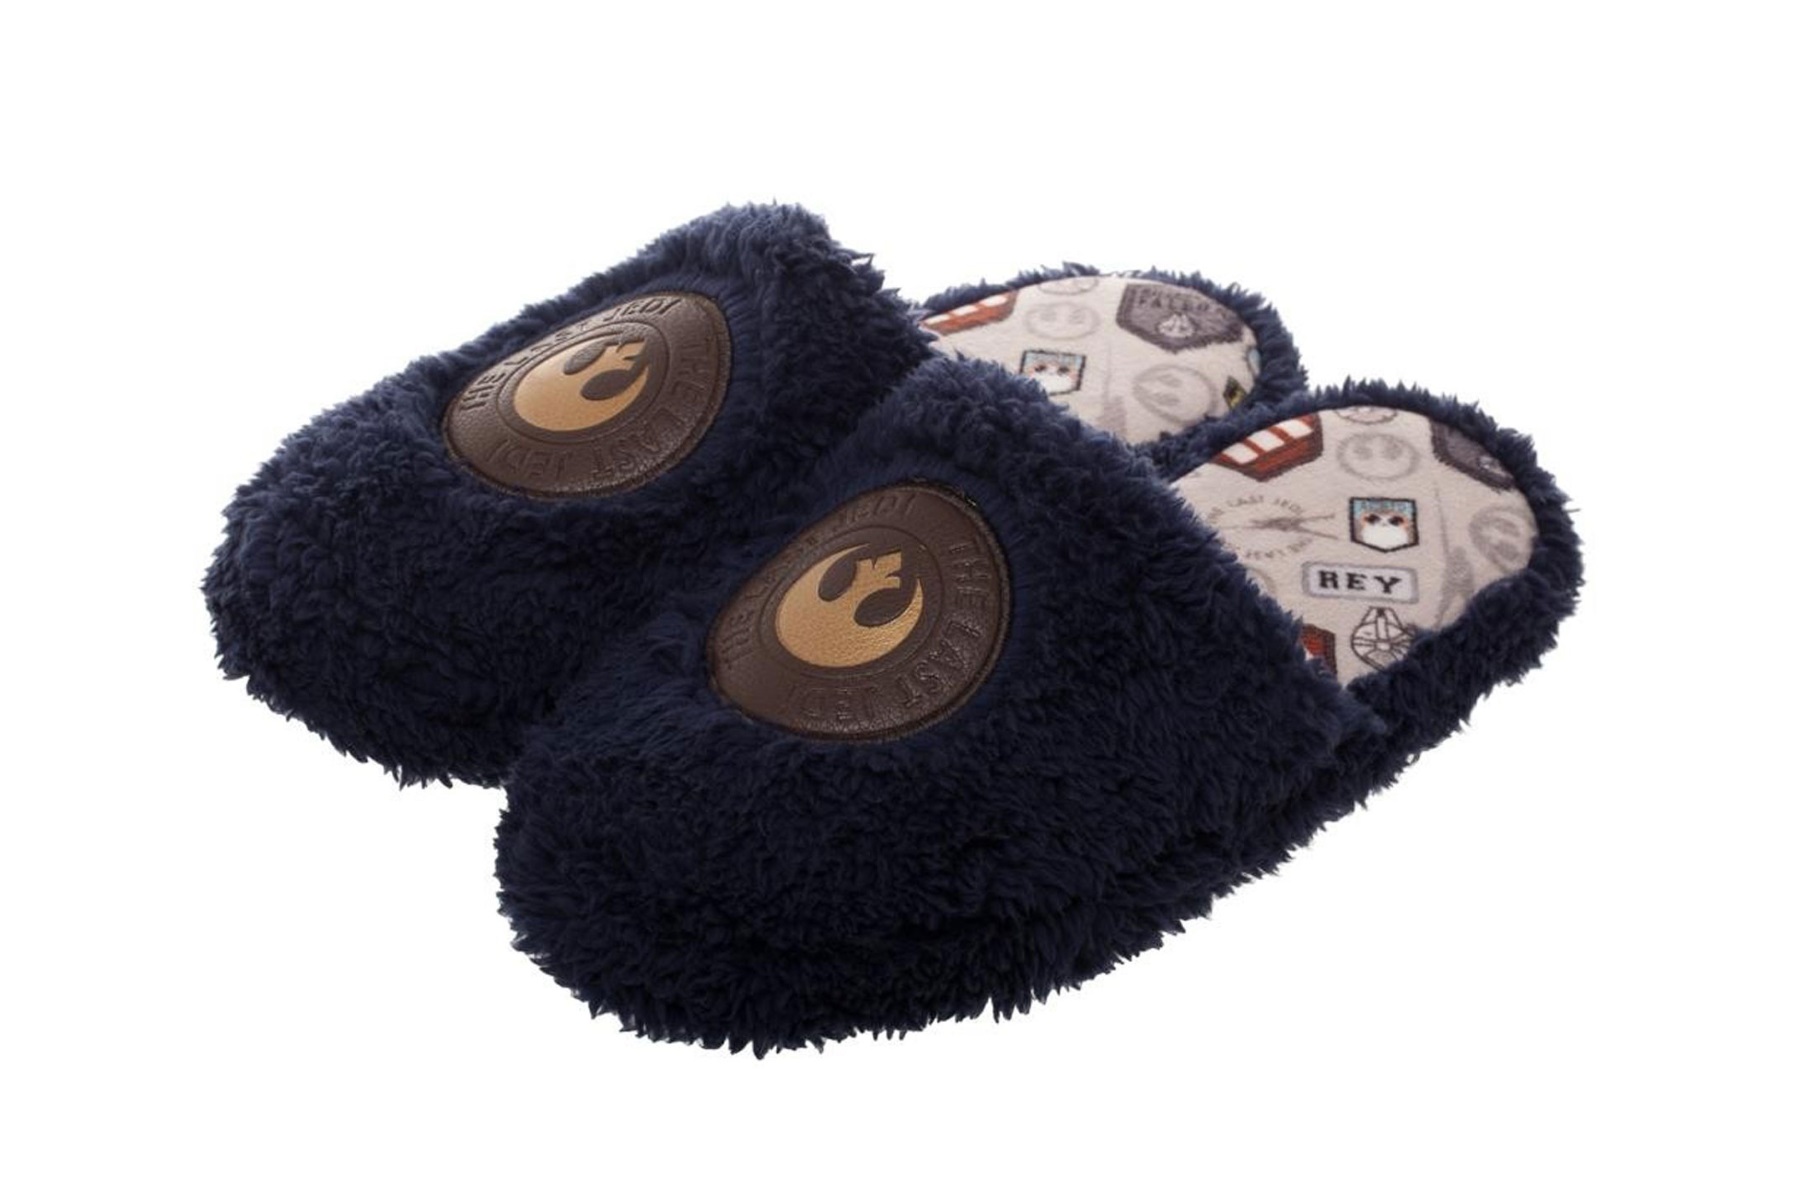 Star Wars The Last Jedi Rey Inspired Adult Scuff Style Slippers at Fun